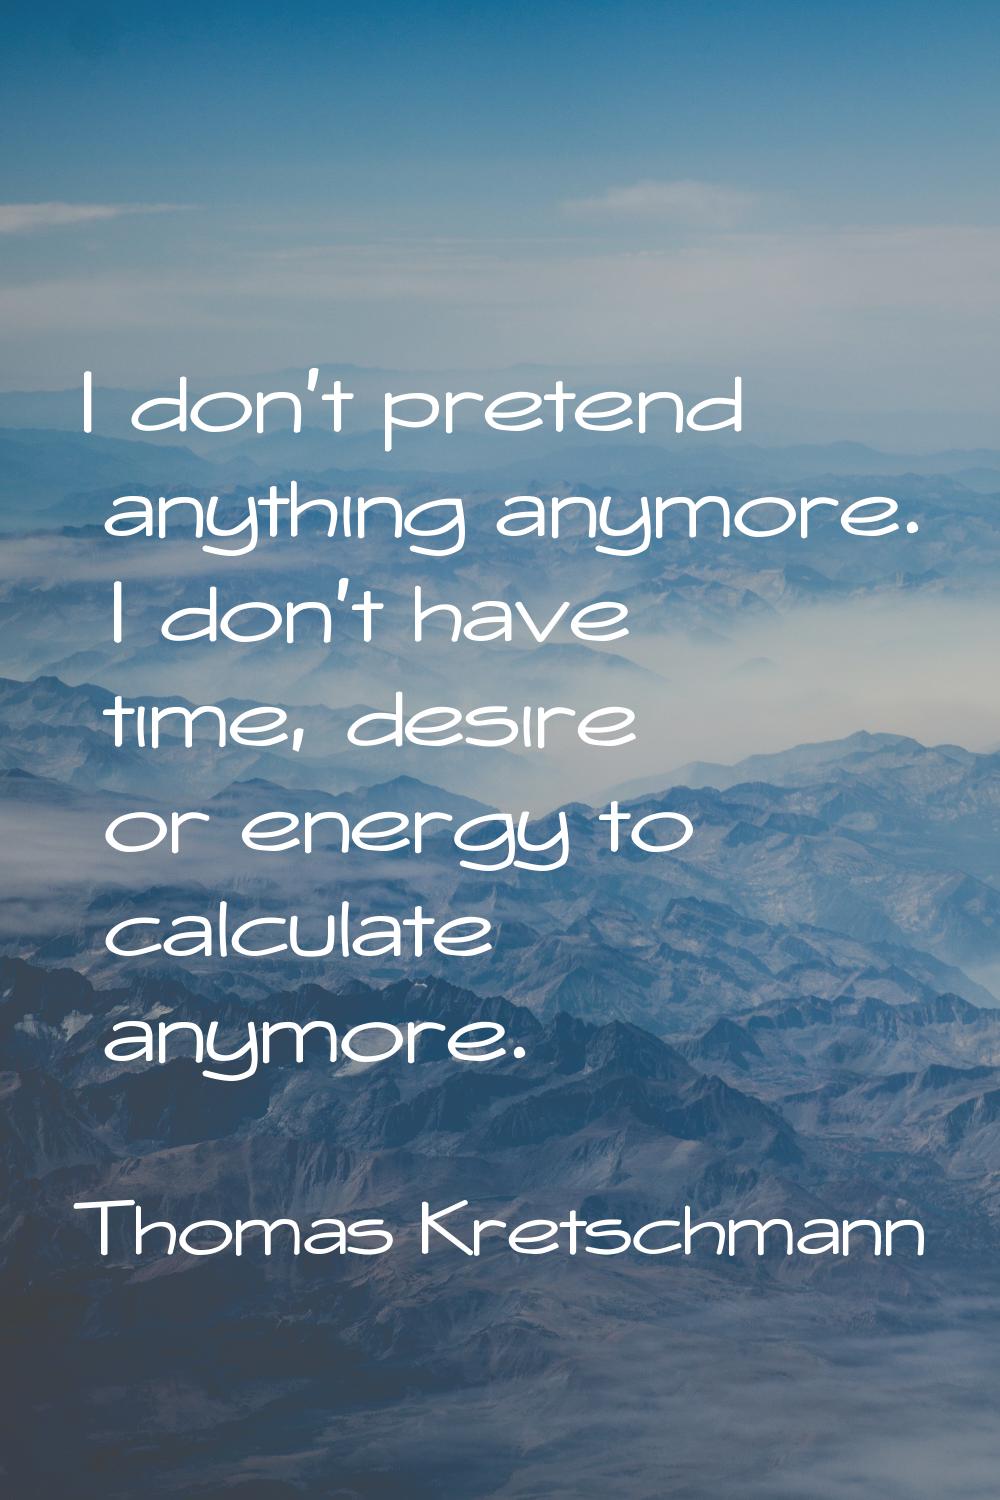 I don't pretend anything anymore. I don't have time, desire or energy to calculate anymore.